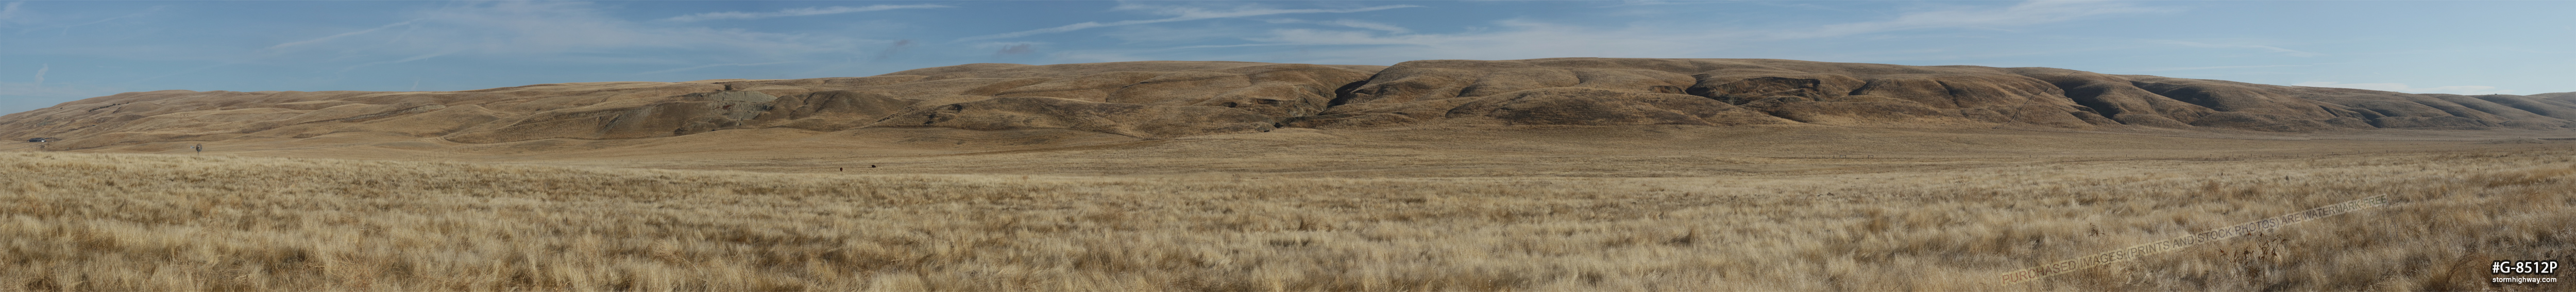 Annette fault zone panorama